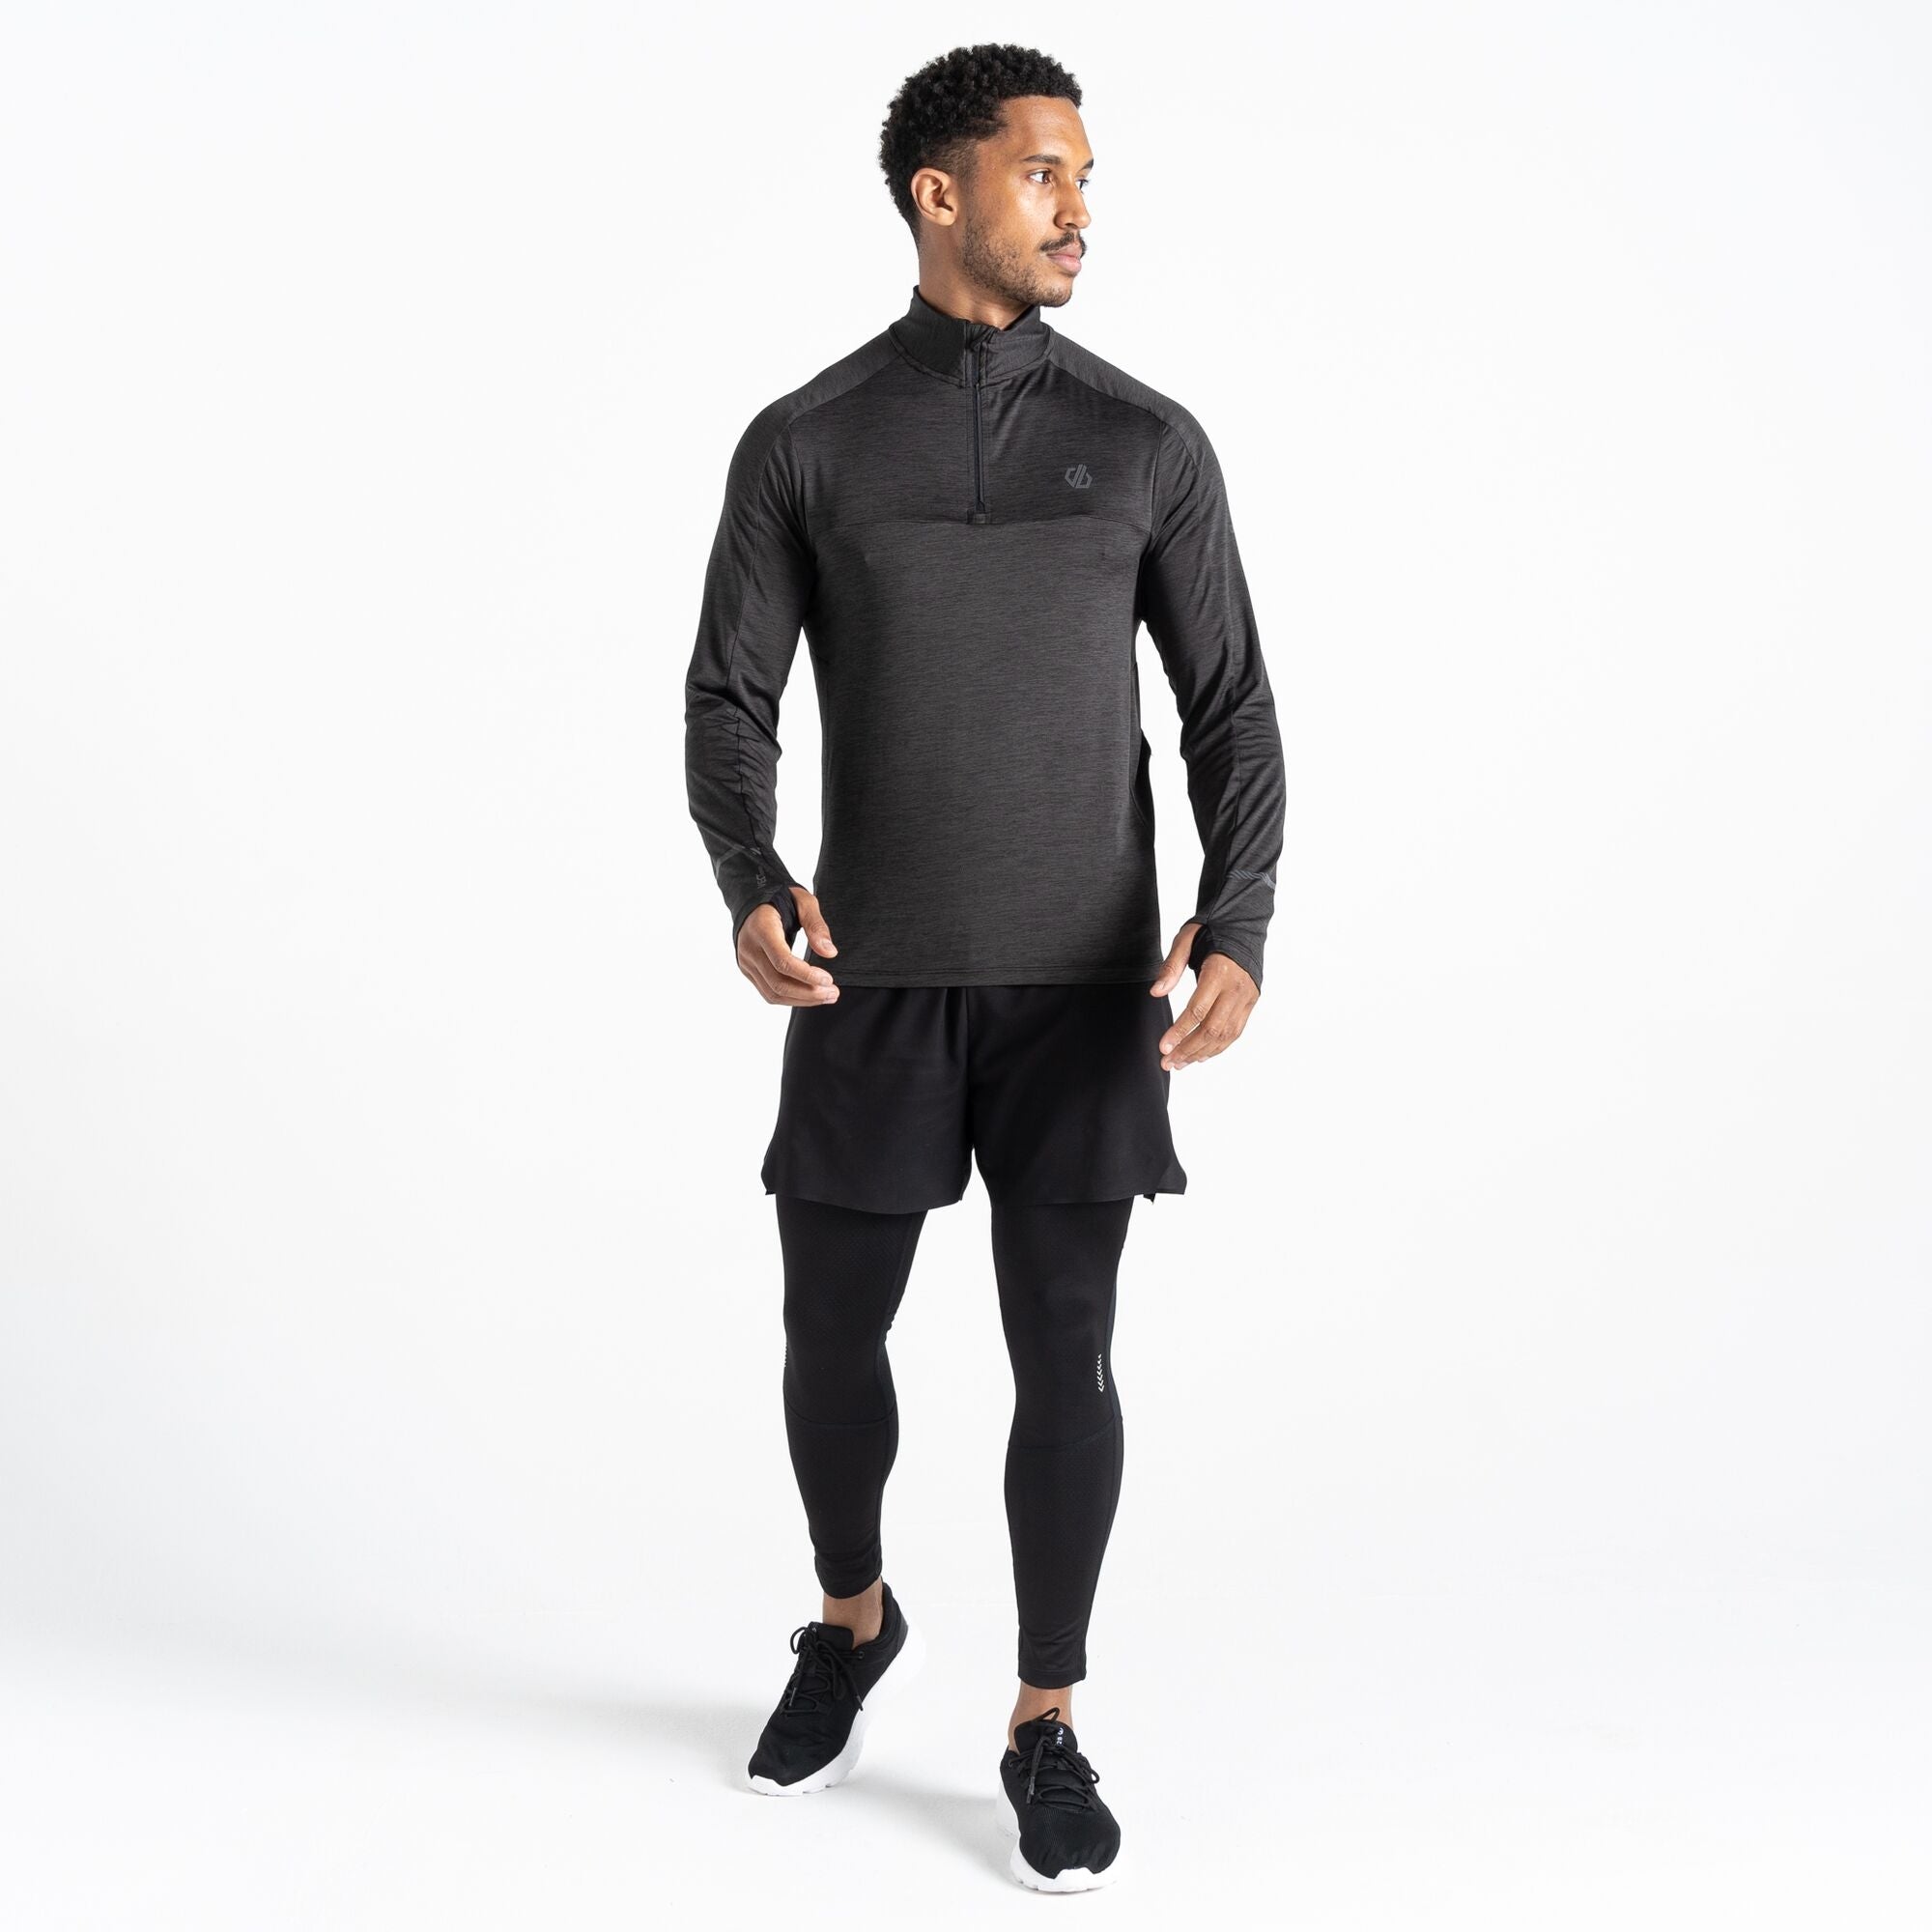 Dare2B Power Up II Jersey | Dare2B | Portwest - The Outdoor Shop